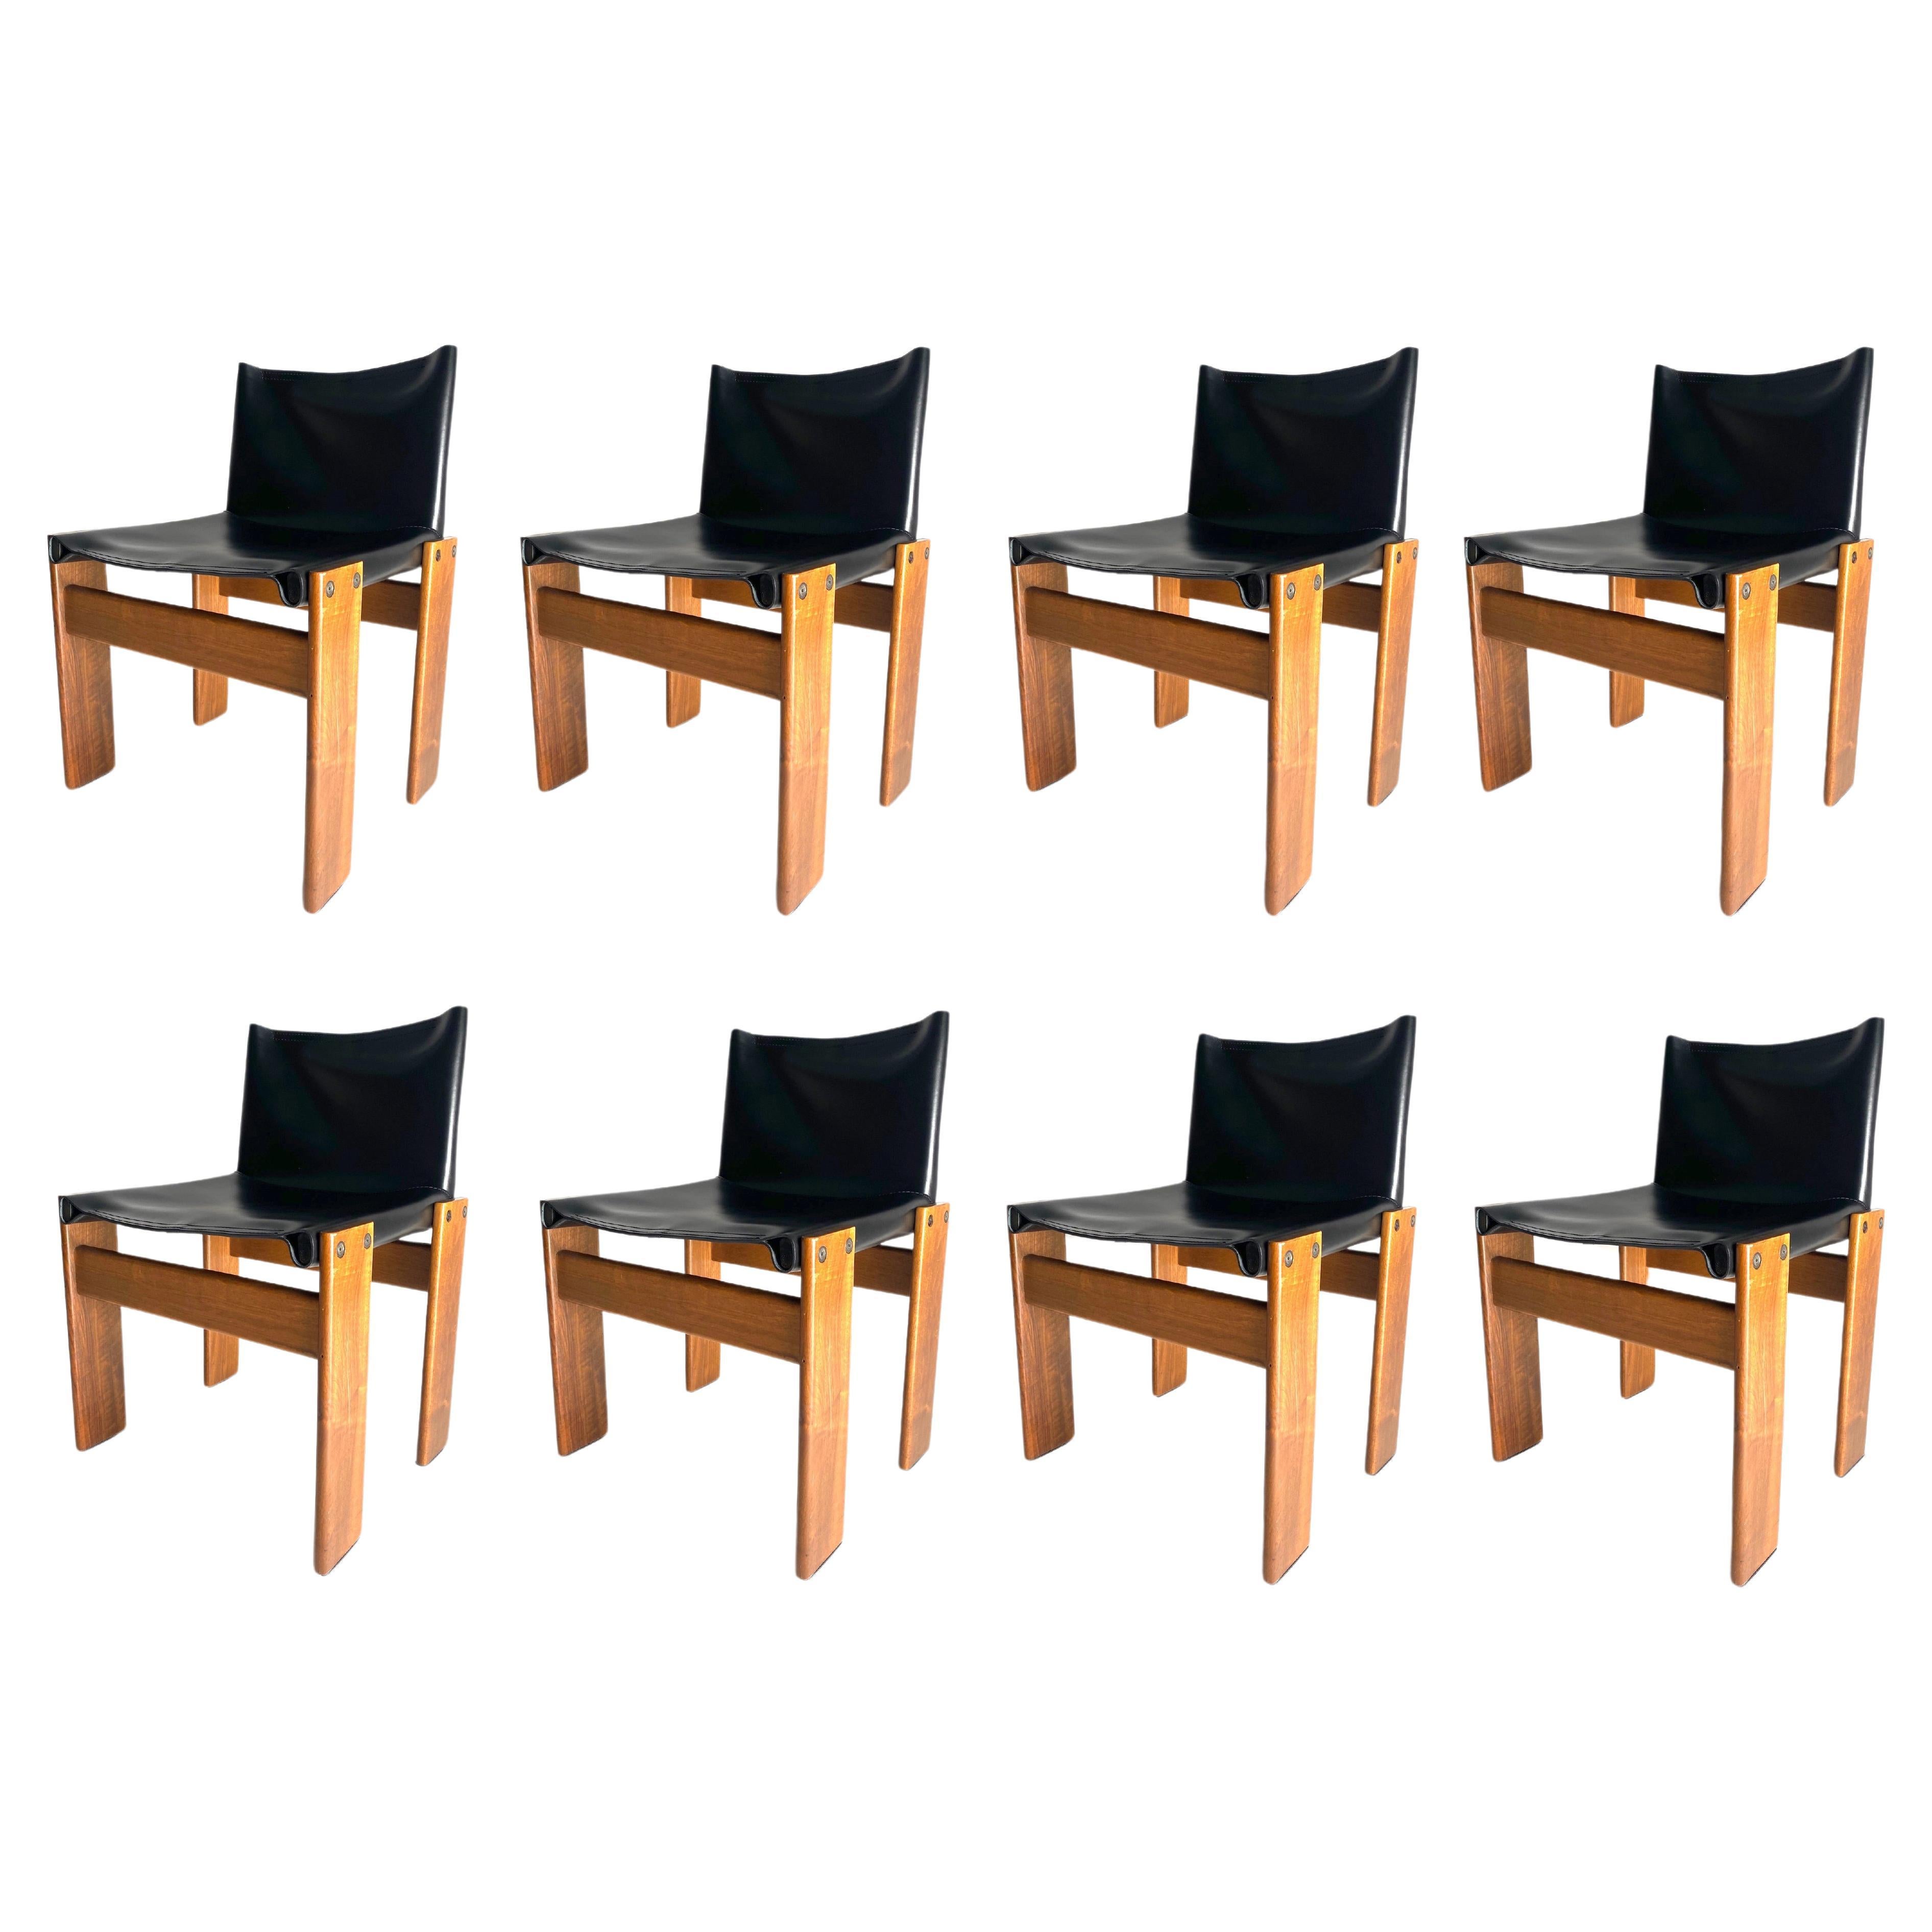 Set of 8 Monk leather Chairs by Afra & Tobia Scarpa for Molteni, Italy 1974